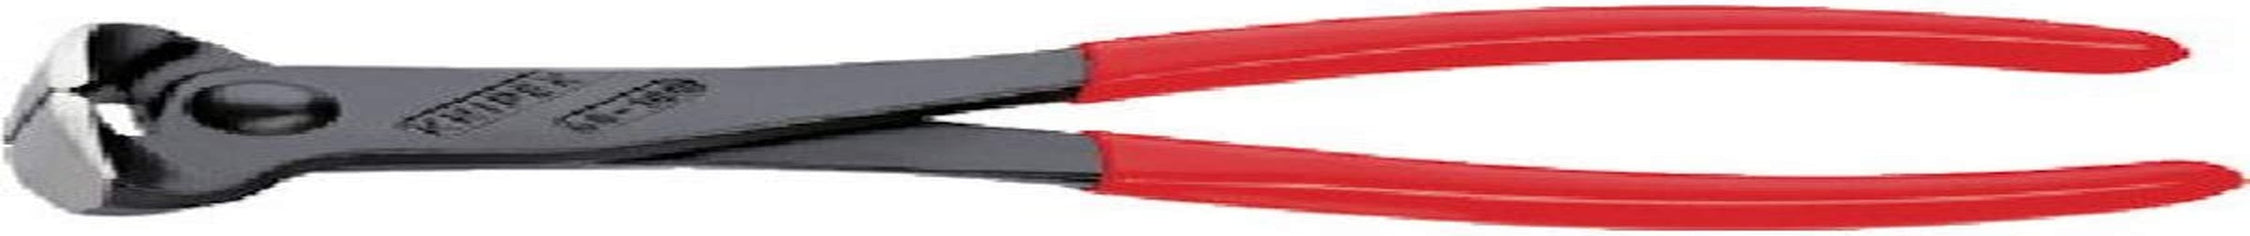 KNIPEX, End Cut Nippers